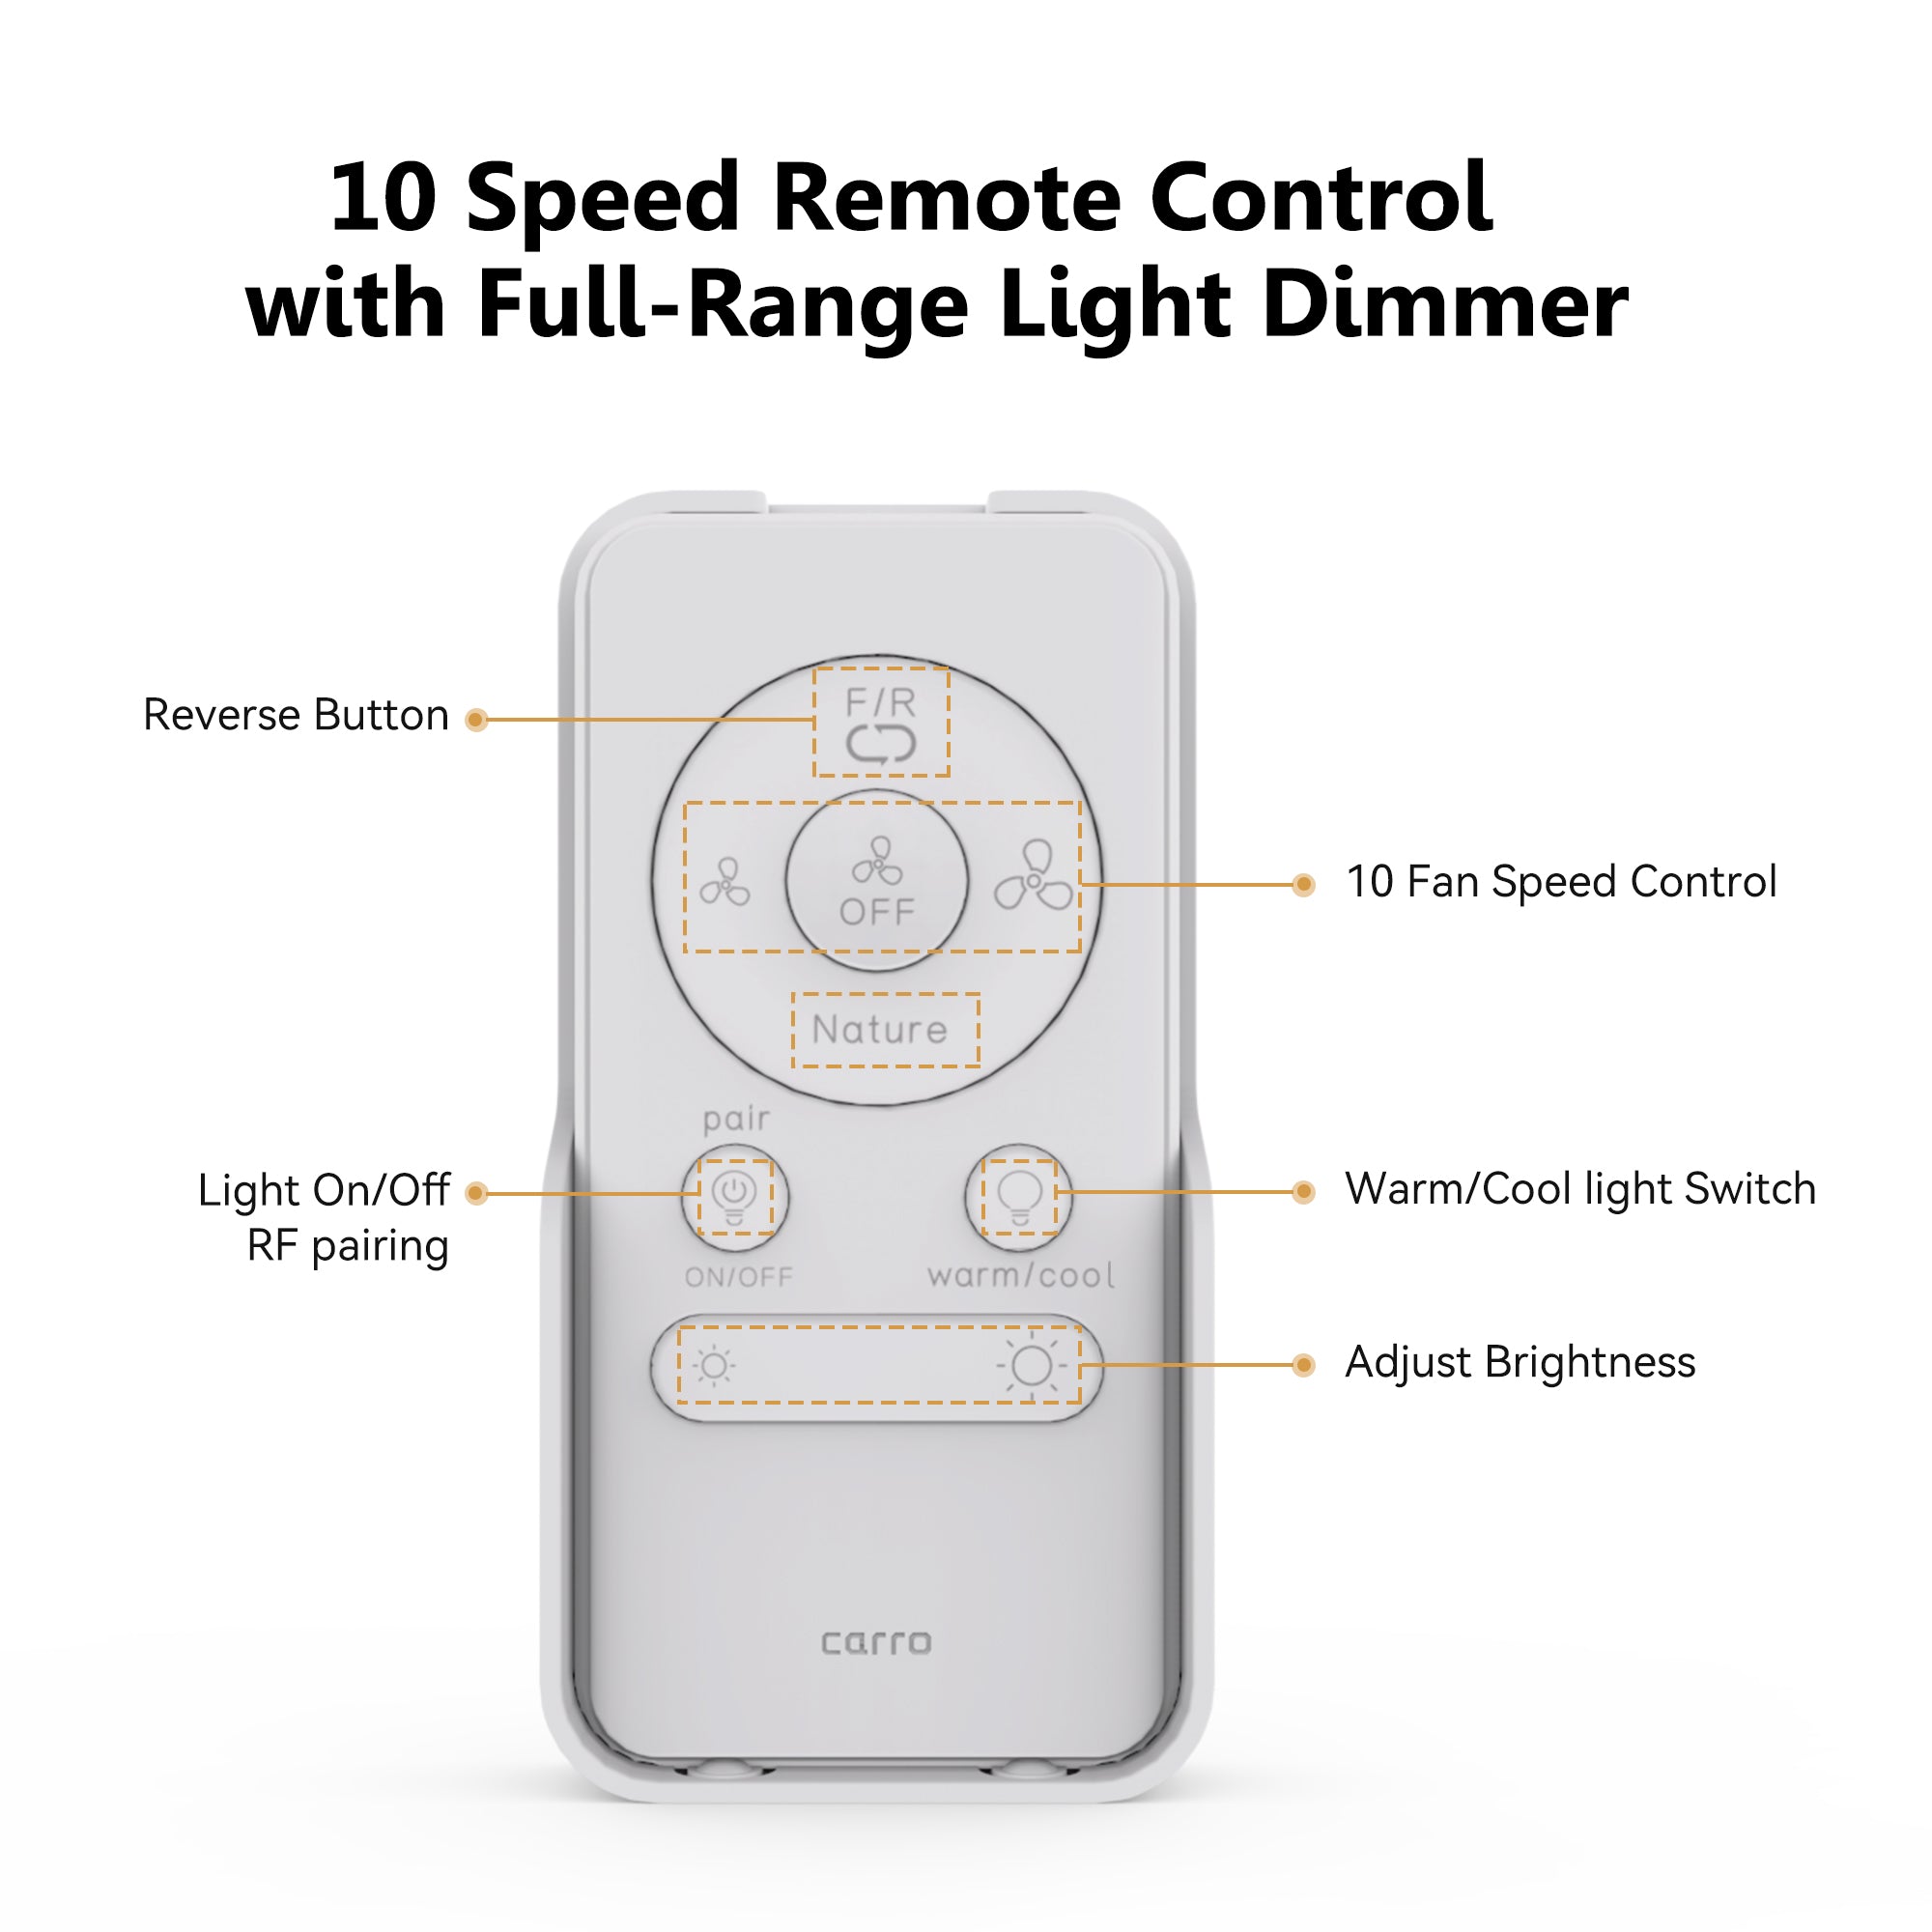 Full function remote control - fan speed, light on/off/dim, reverse function